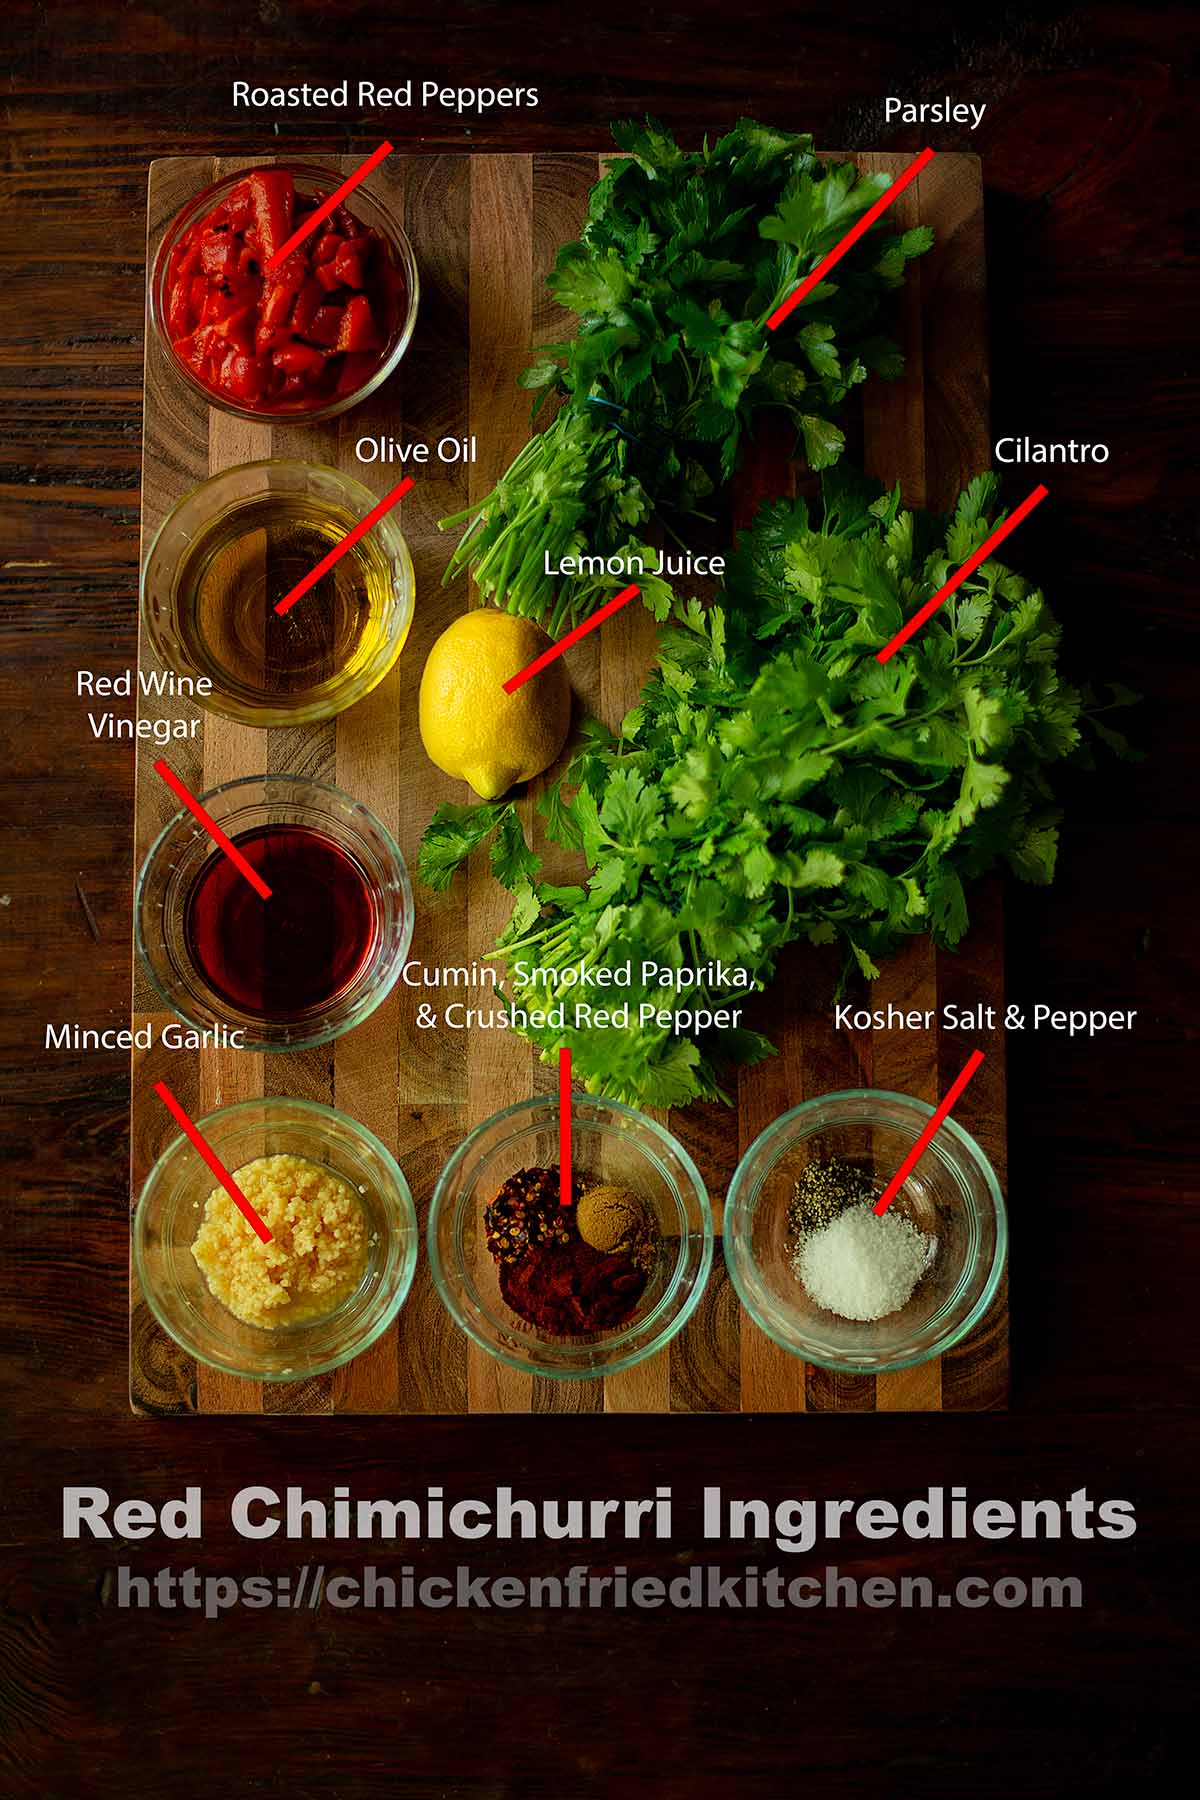 Red Chimichurri ingredients laid out on a wooden table and labeled.